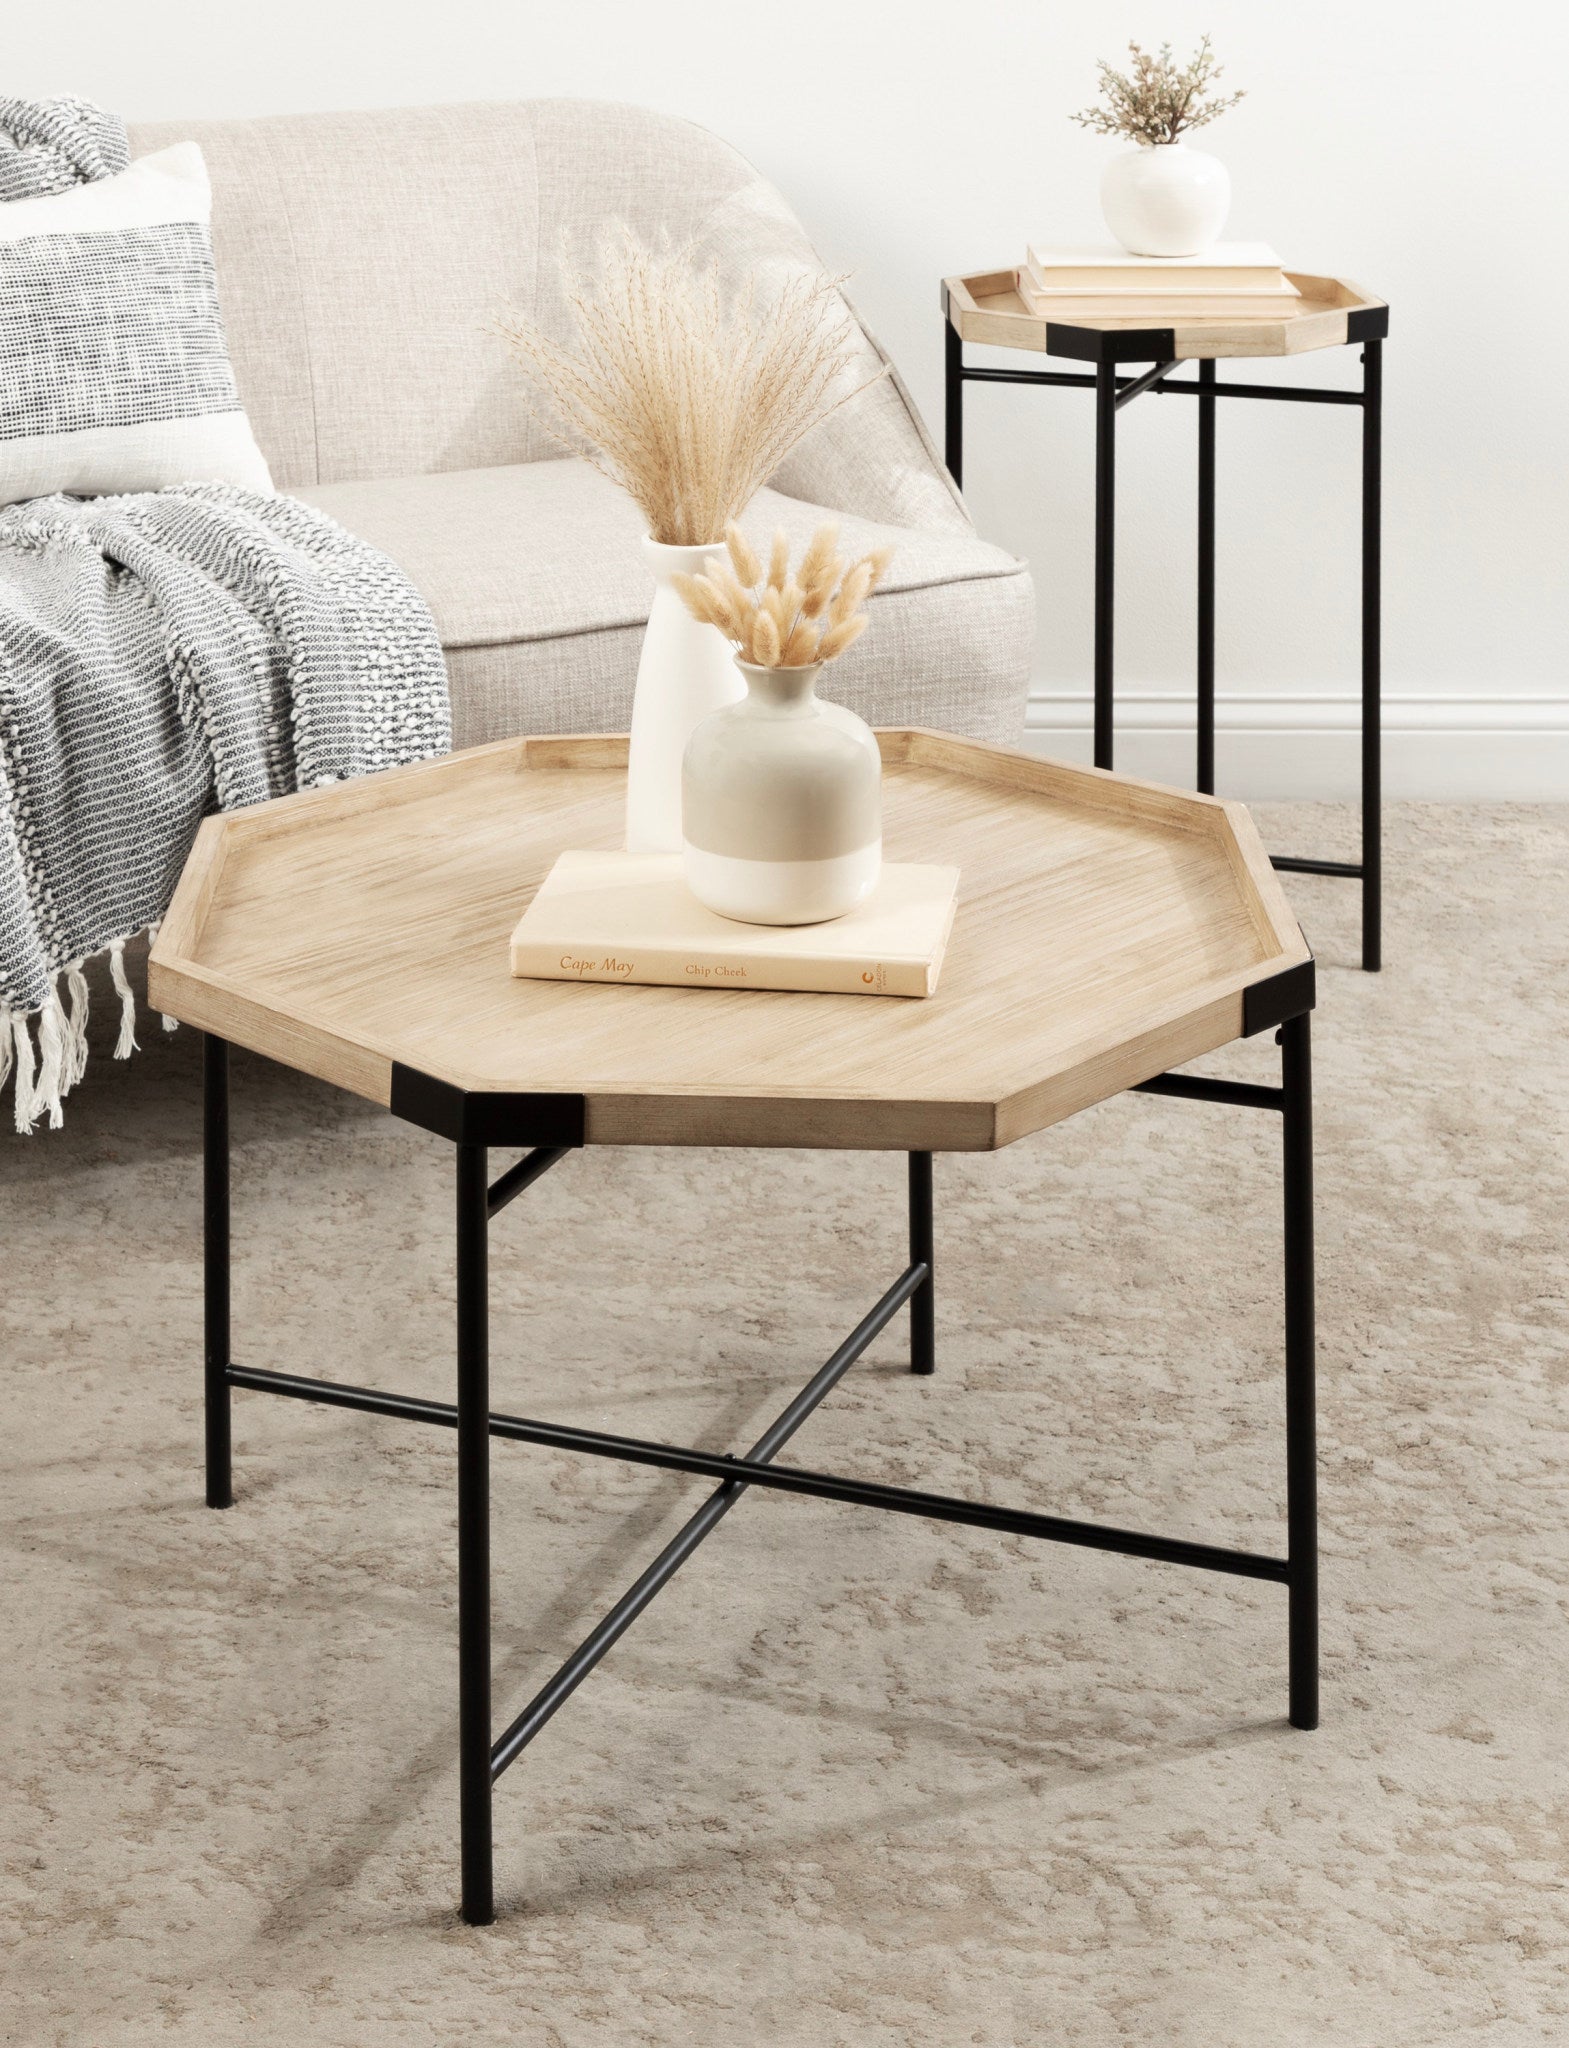 Occonor Octagon Side Table Wood